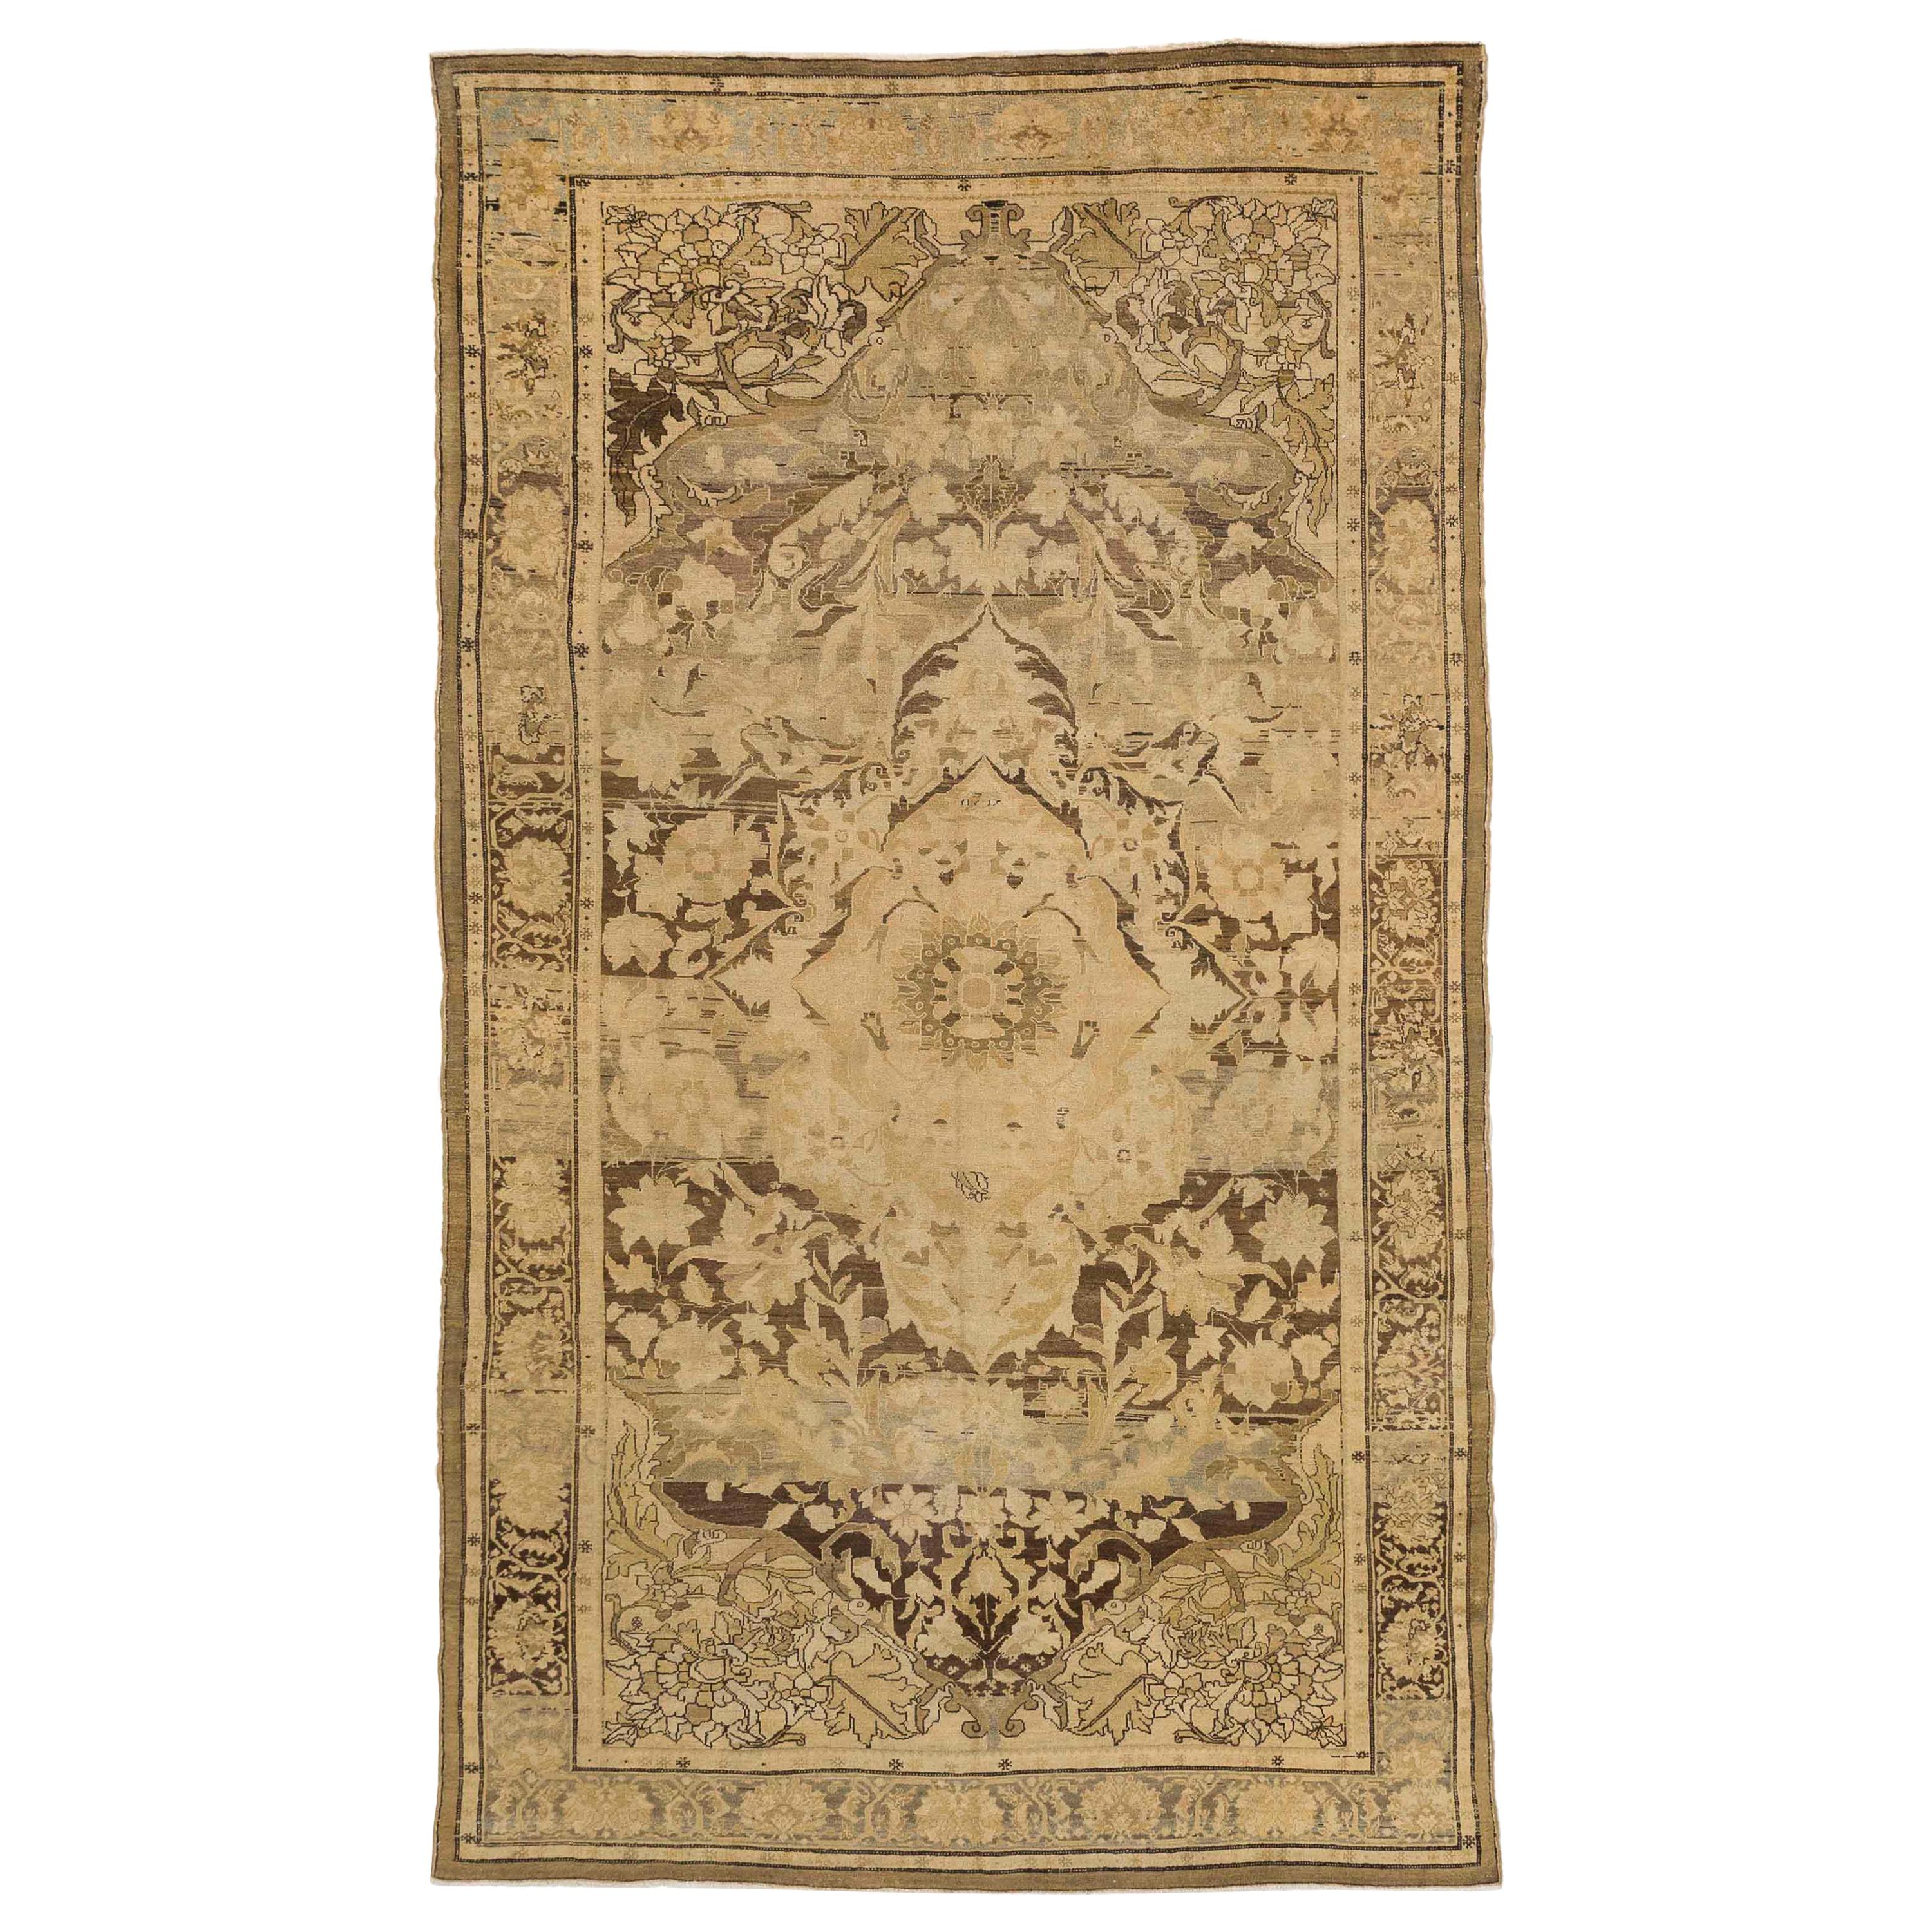 Antique Persian Rug Malayer Design with Rustic Floral Patterns, circa 1920s